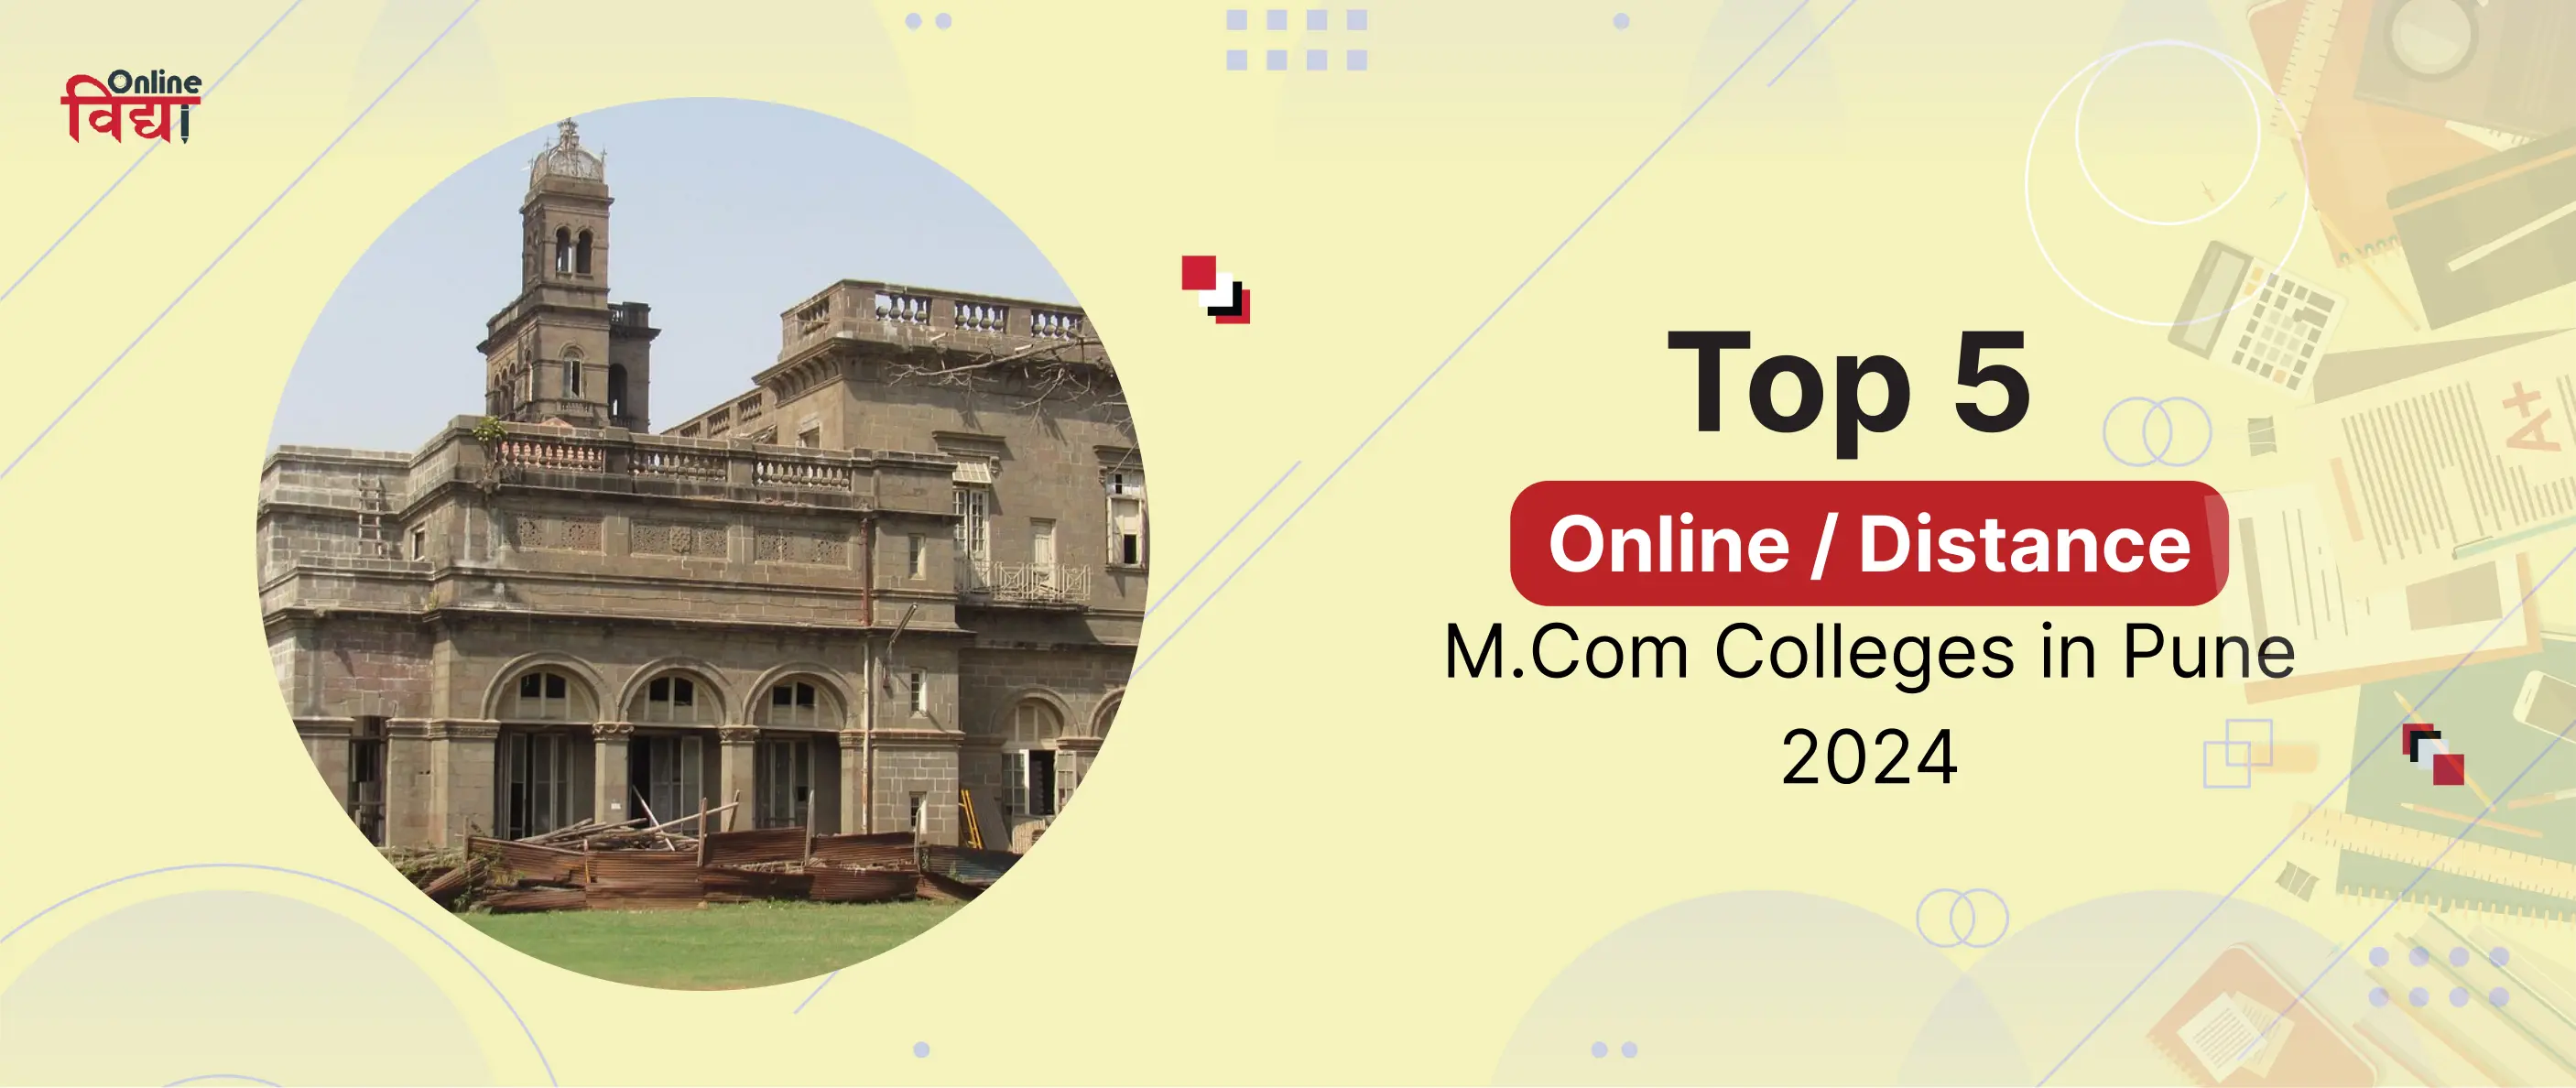 Top 5 Online/Distance M.Com Colleges in Pune 2024